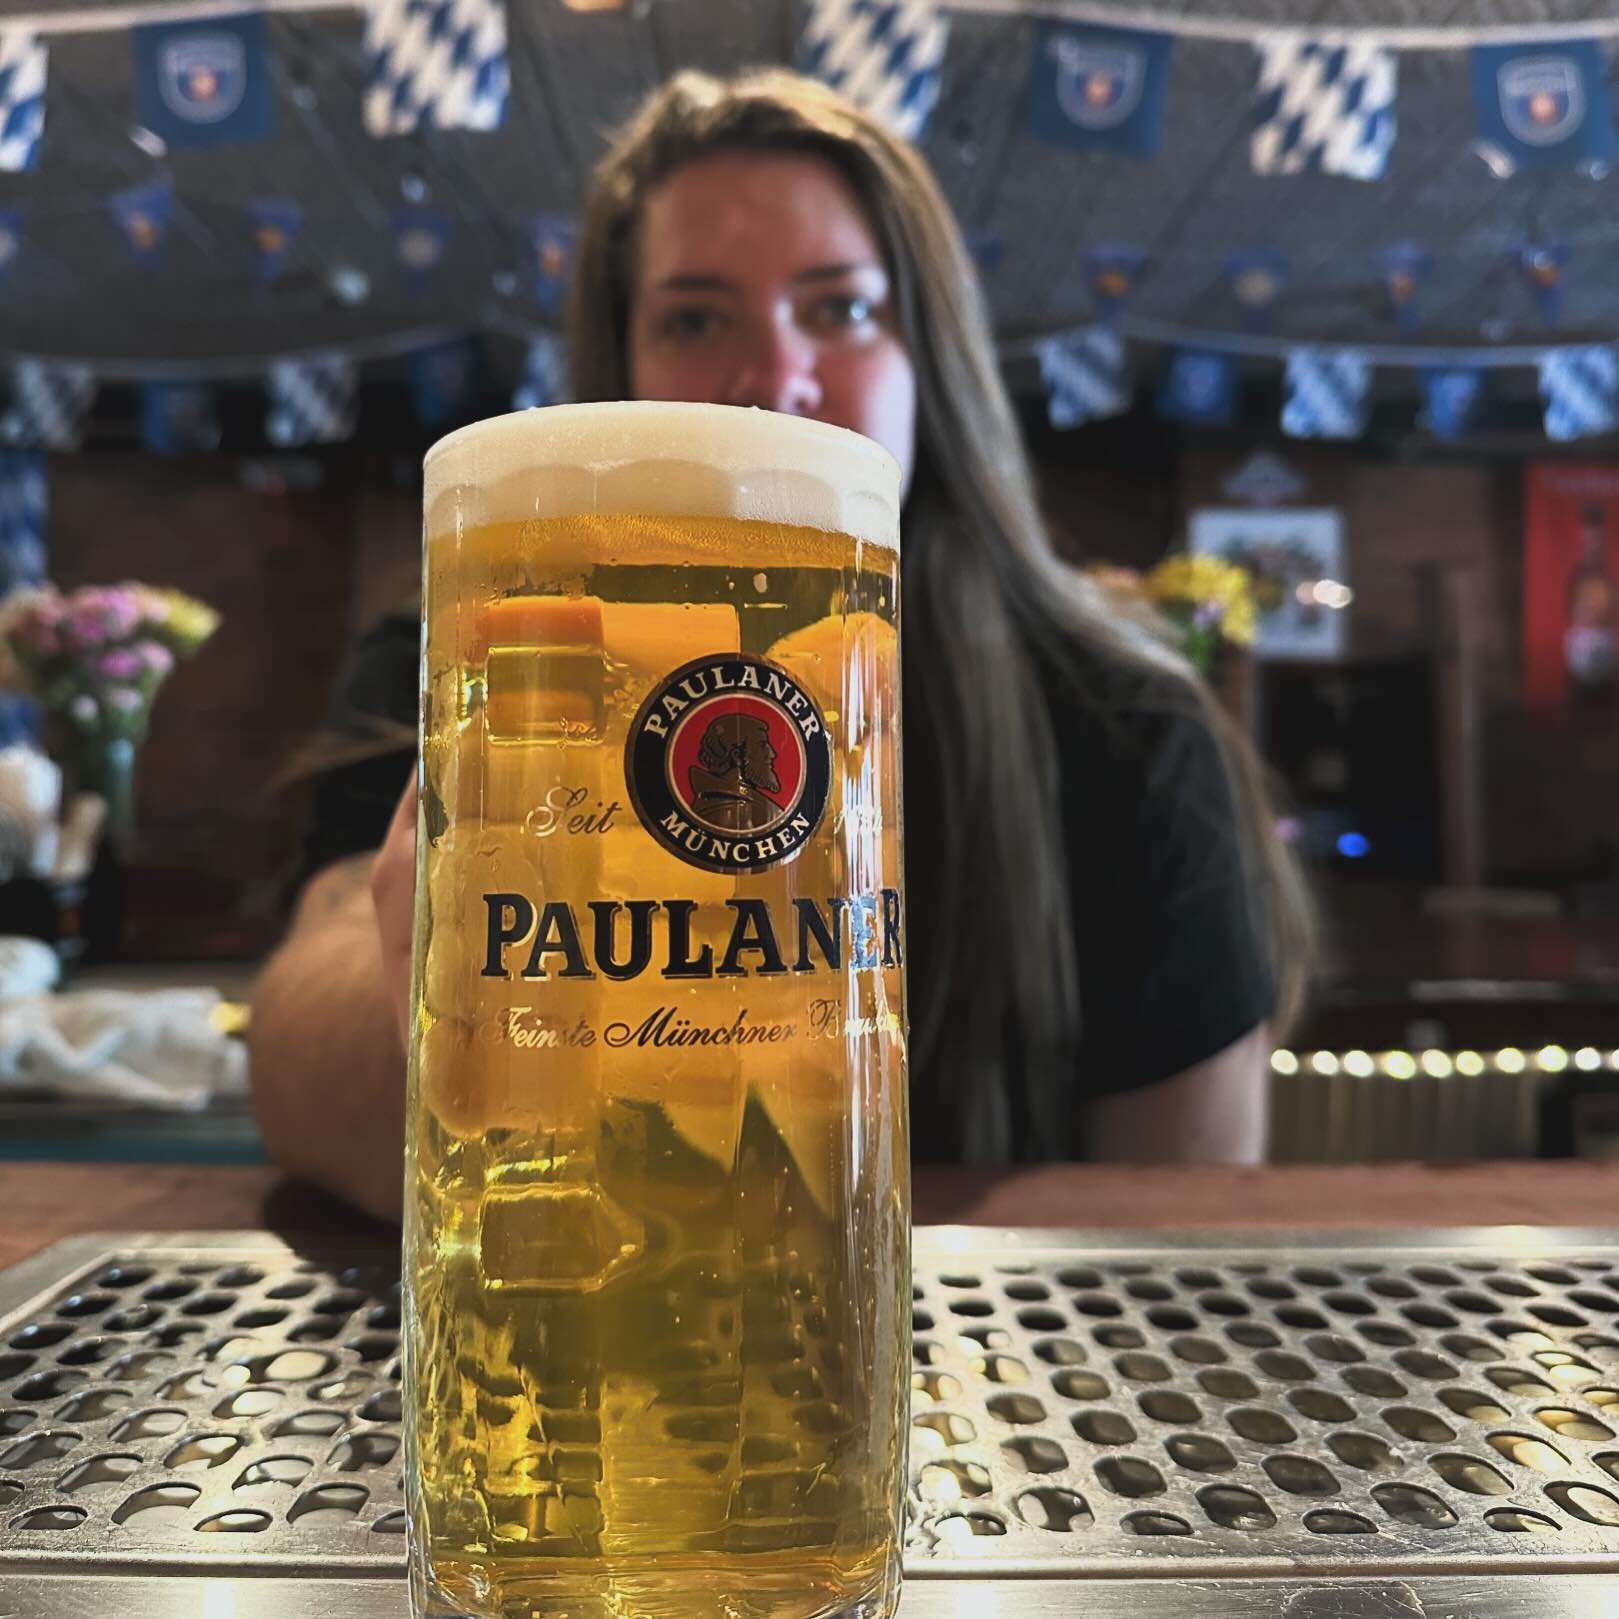 Paulaner Lager is back on draft just in time for Trivia Night🍻 There&rsquo;s no better way to spend your Thursday than with a cold pint of Paulaner &amp; Trivia with your friends! Come show us what you&rsquo;ve got 🥨🌭🍻